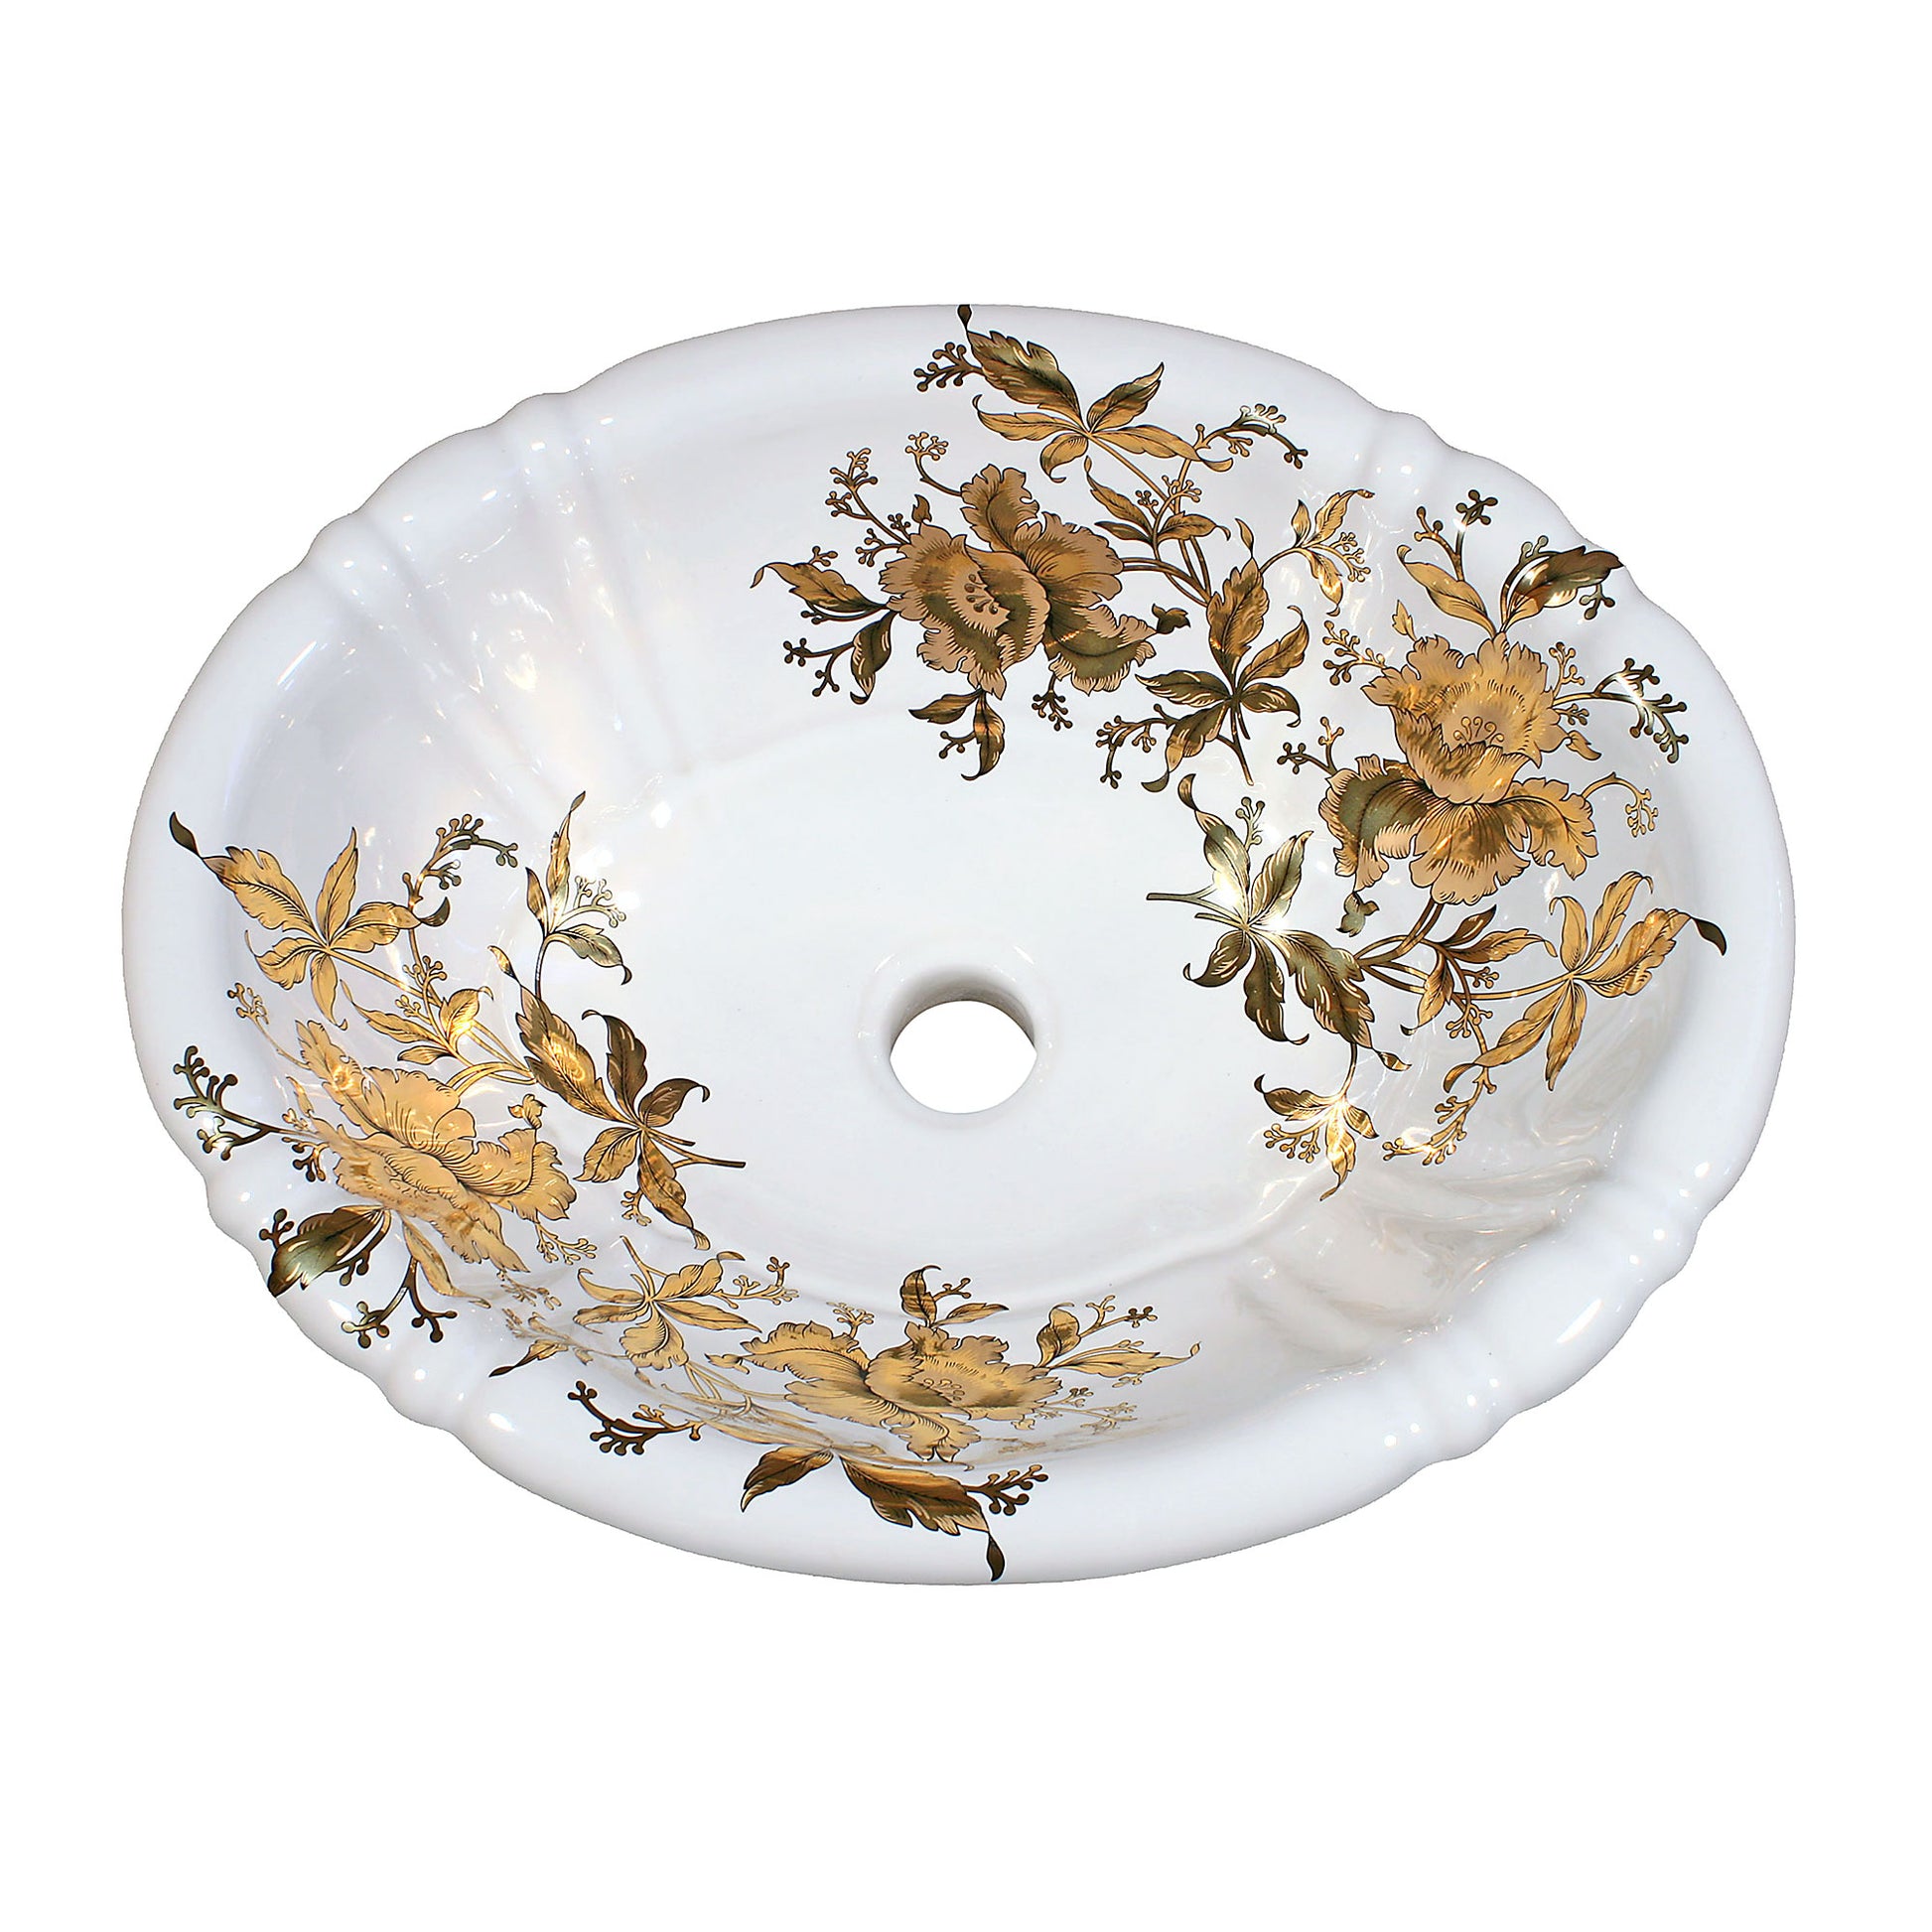 Fluted bathroom sink painted with gold orchids design